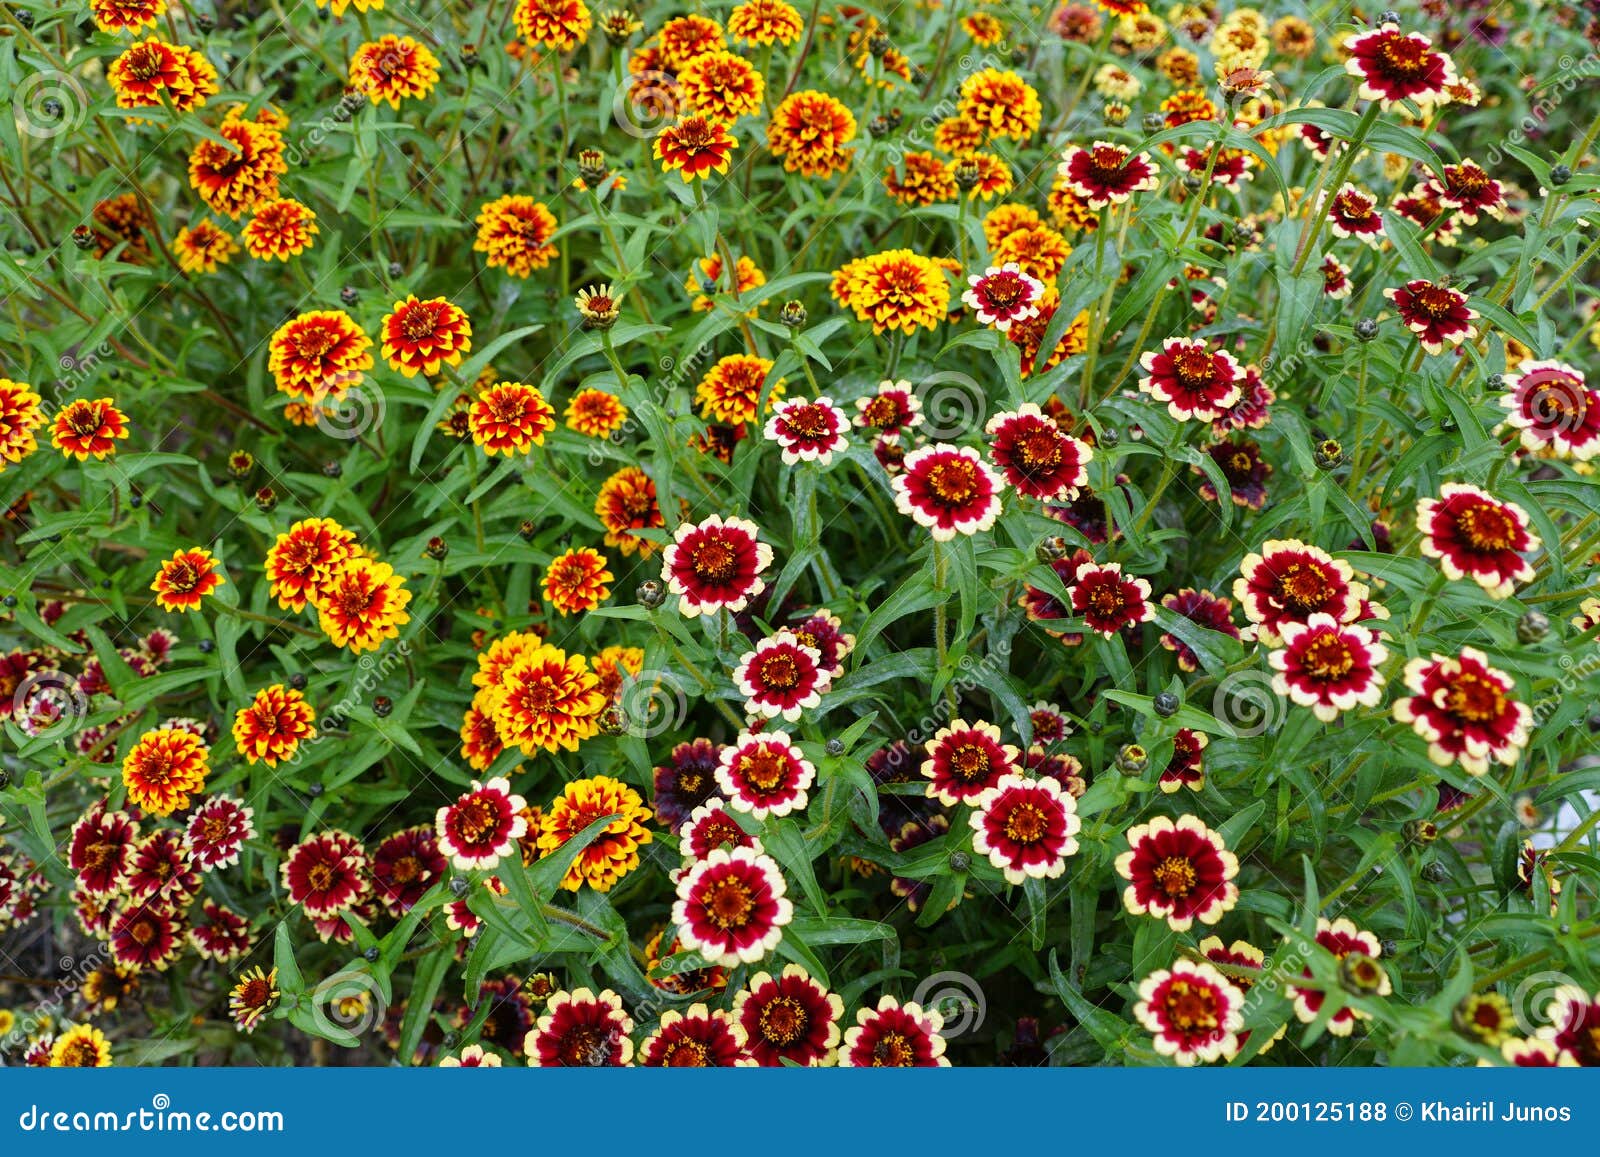 a mixed red, white and yellow `jazzy group` zinnia flower